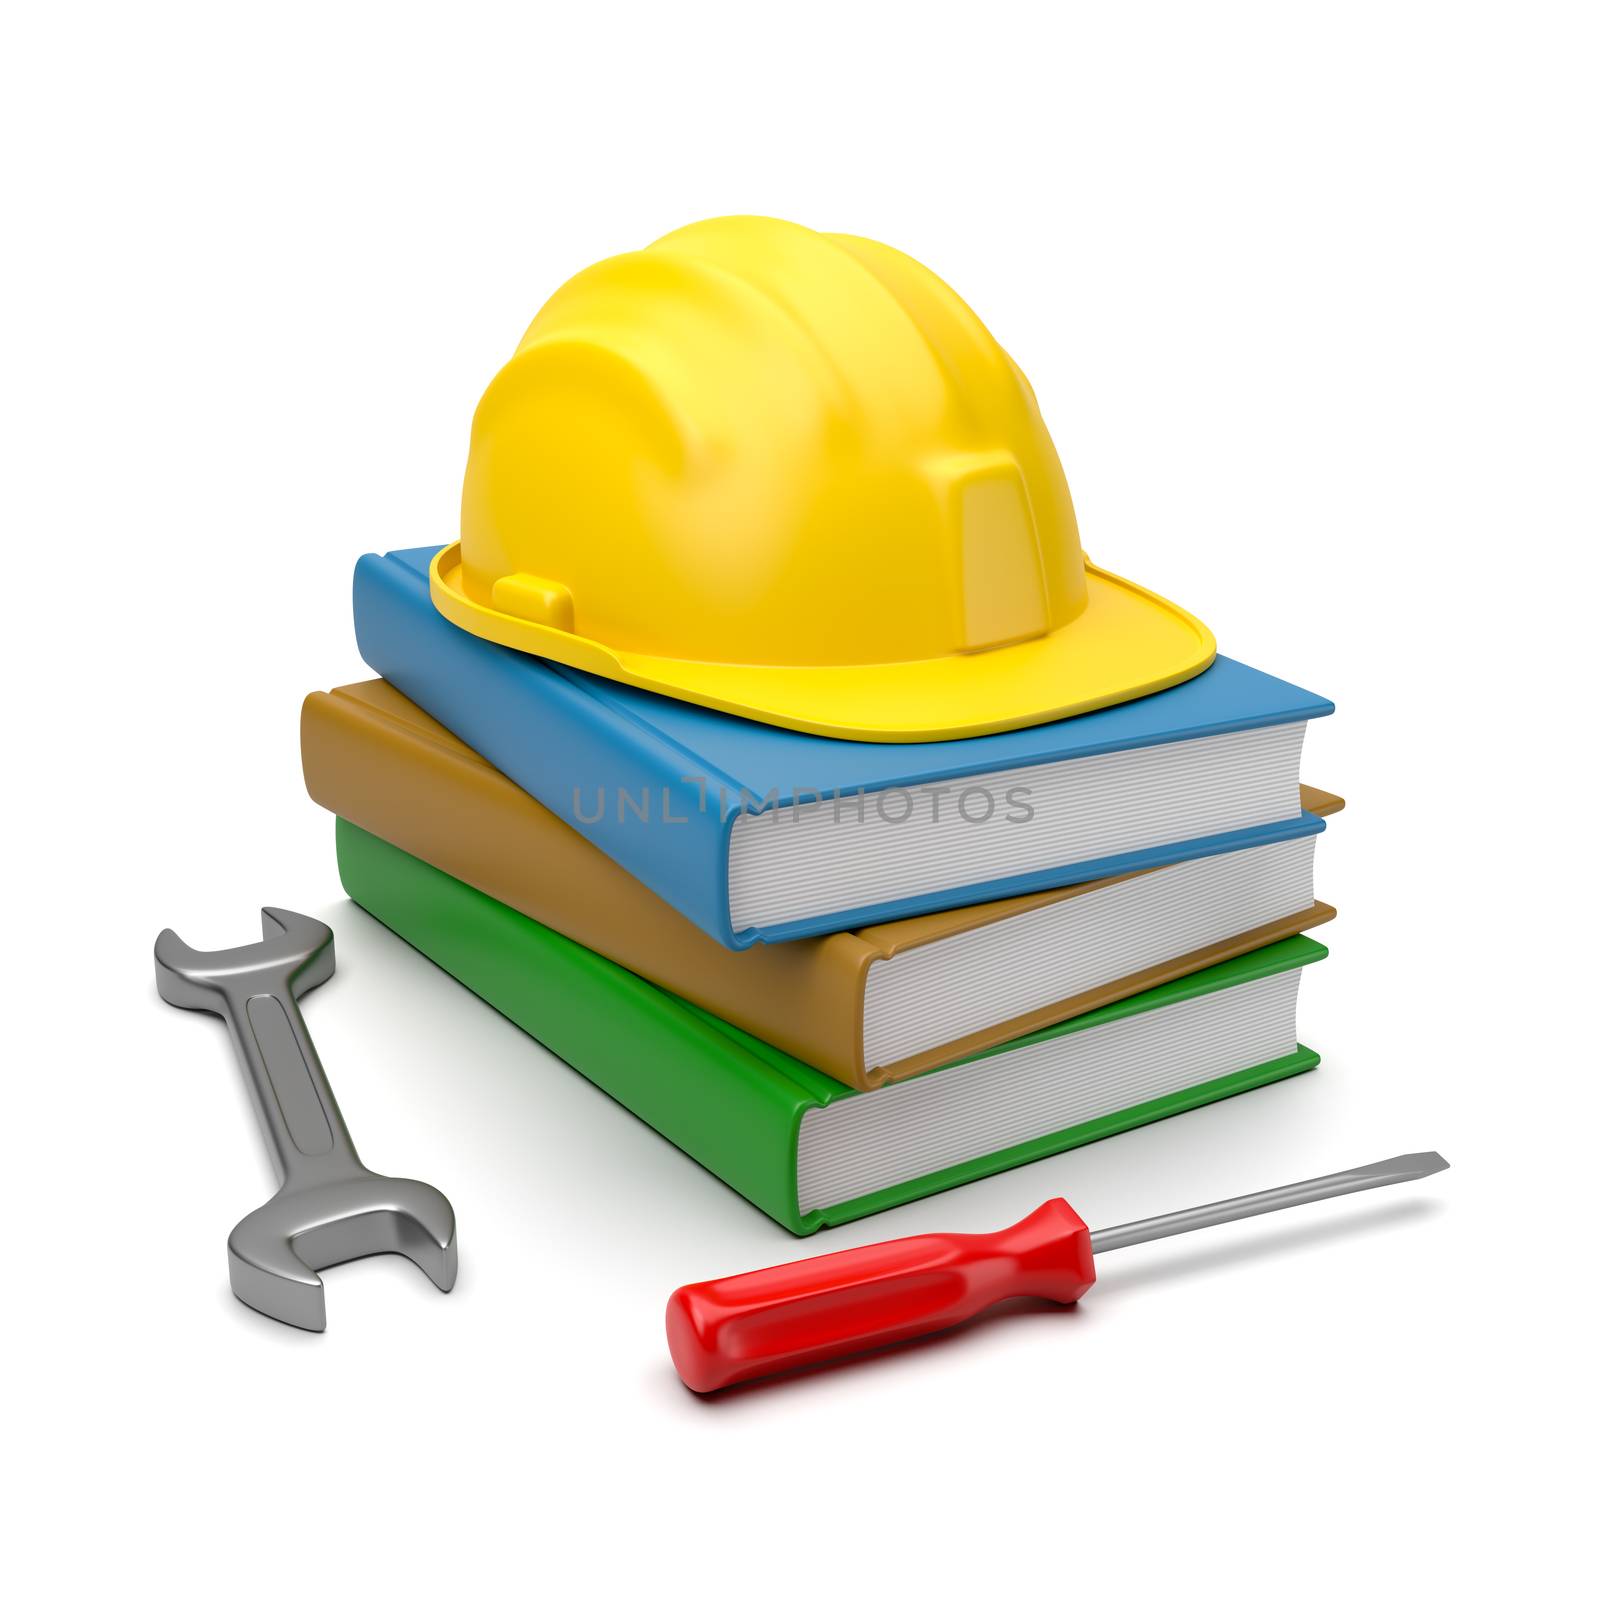 Stack of Books with a Yellow Hard Hat, a Spanner and a Screwdriver on White Background 3D Illustration, Working While Studying Concept